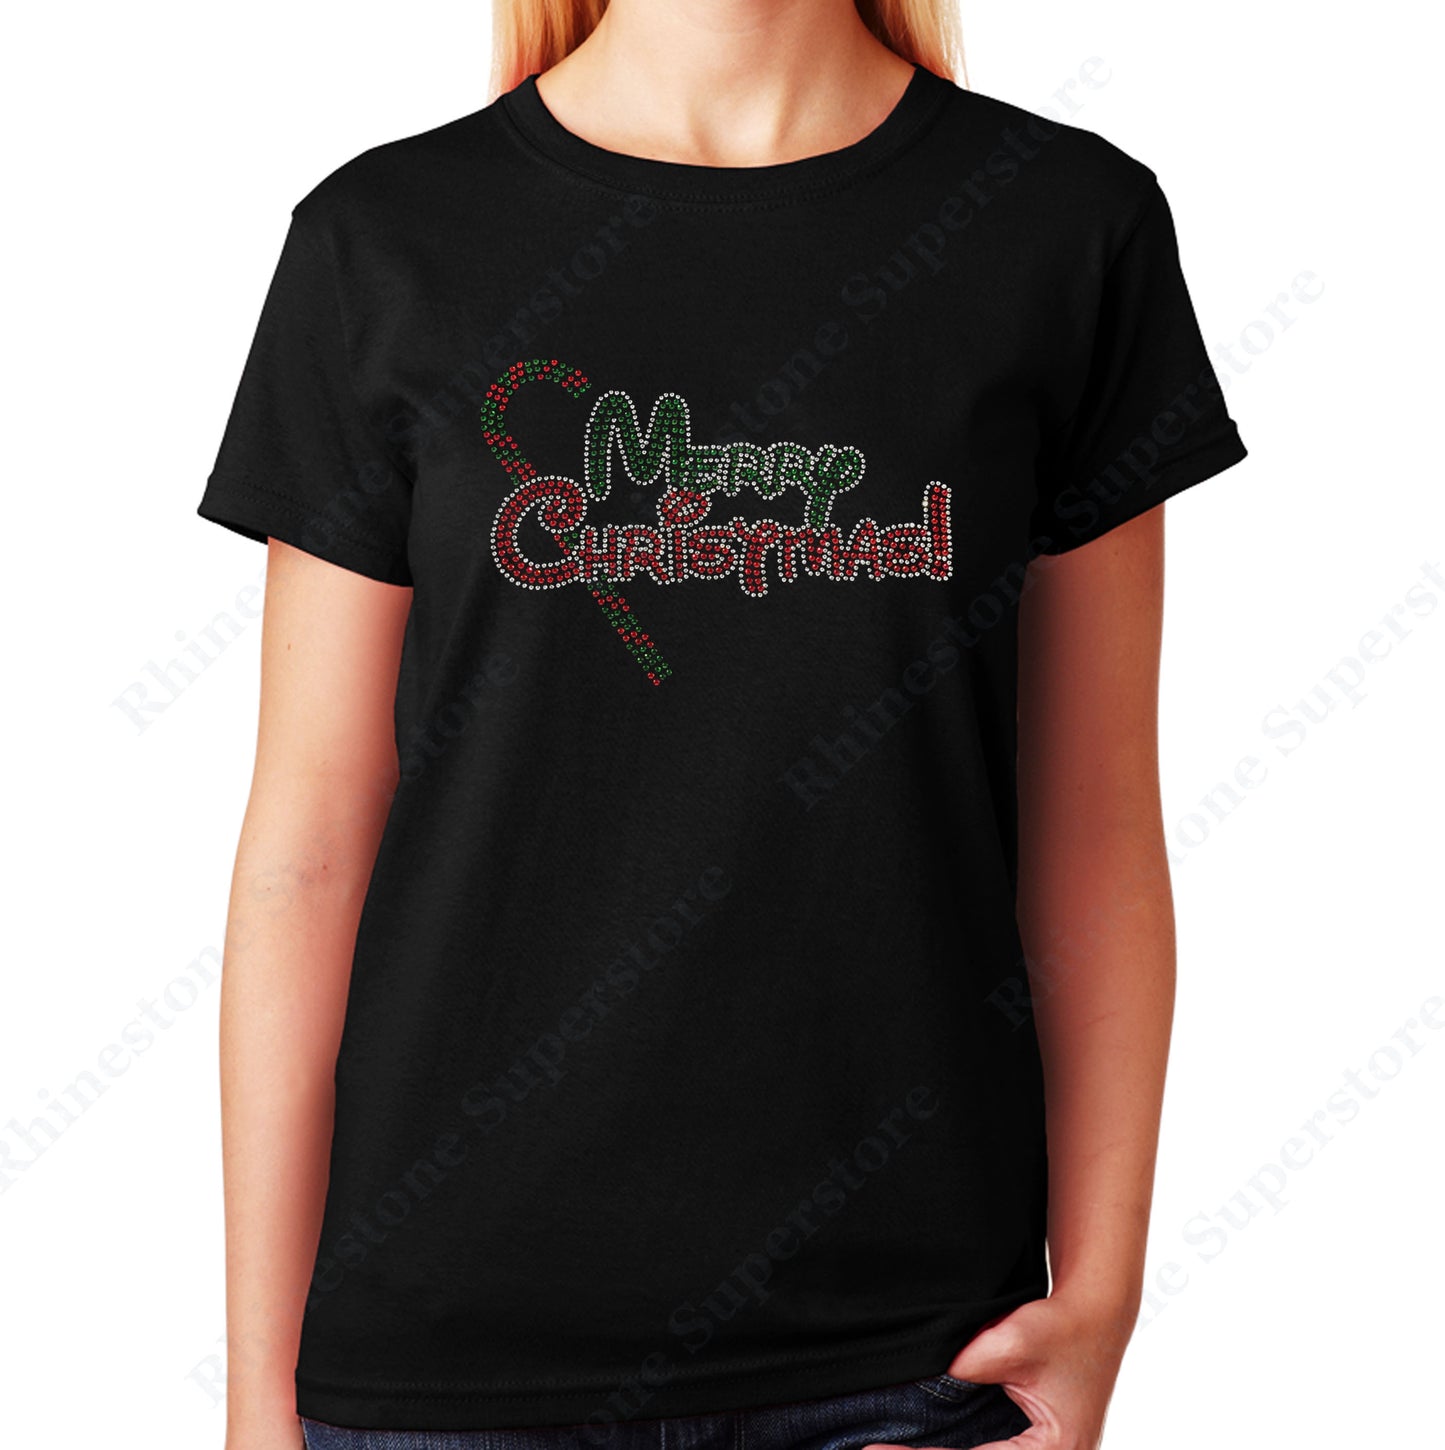 Unisex T-Shirt with Merry Christmas With Candy Cane in Rhinestones